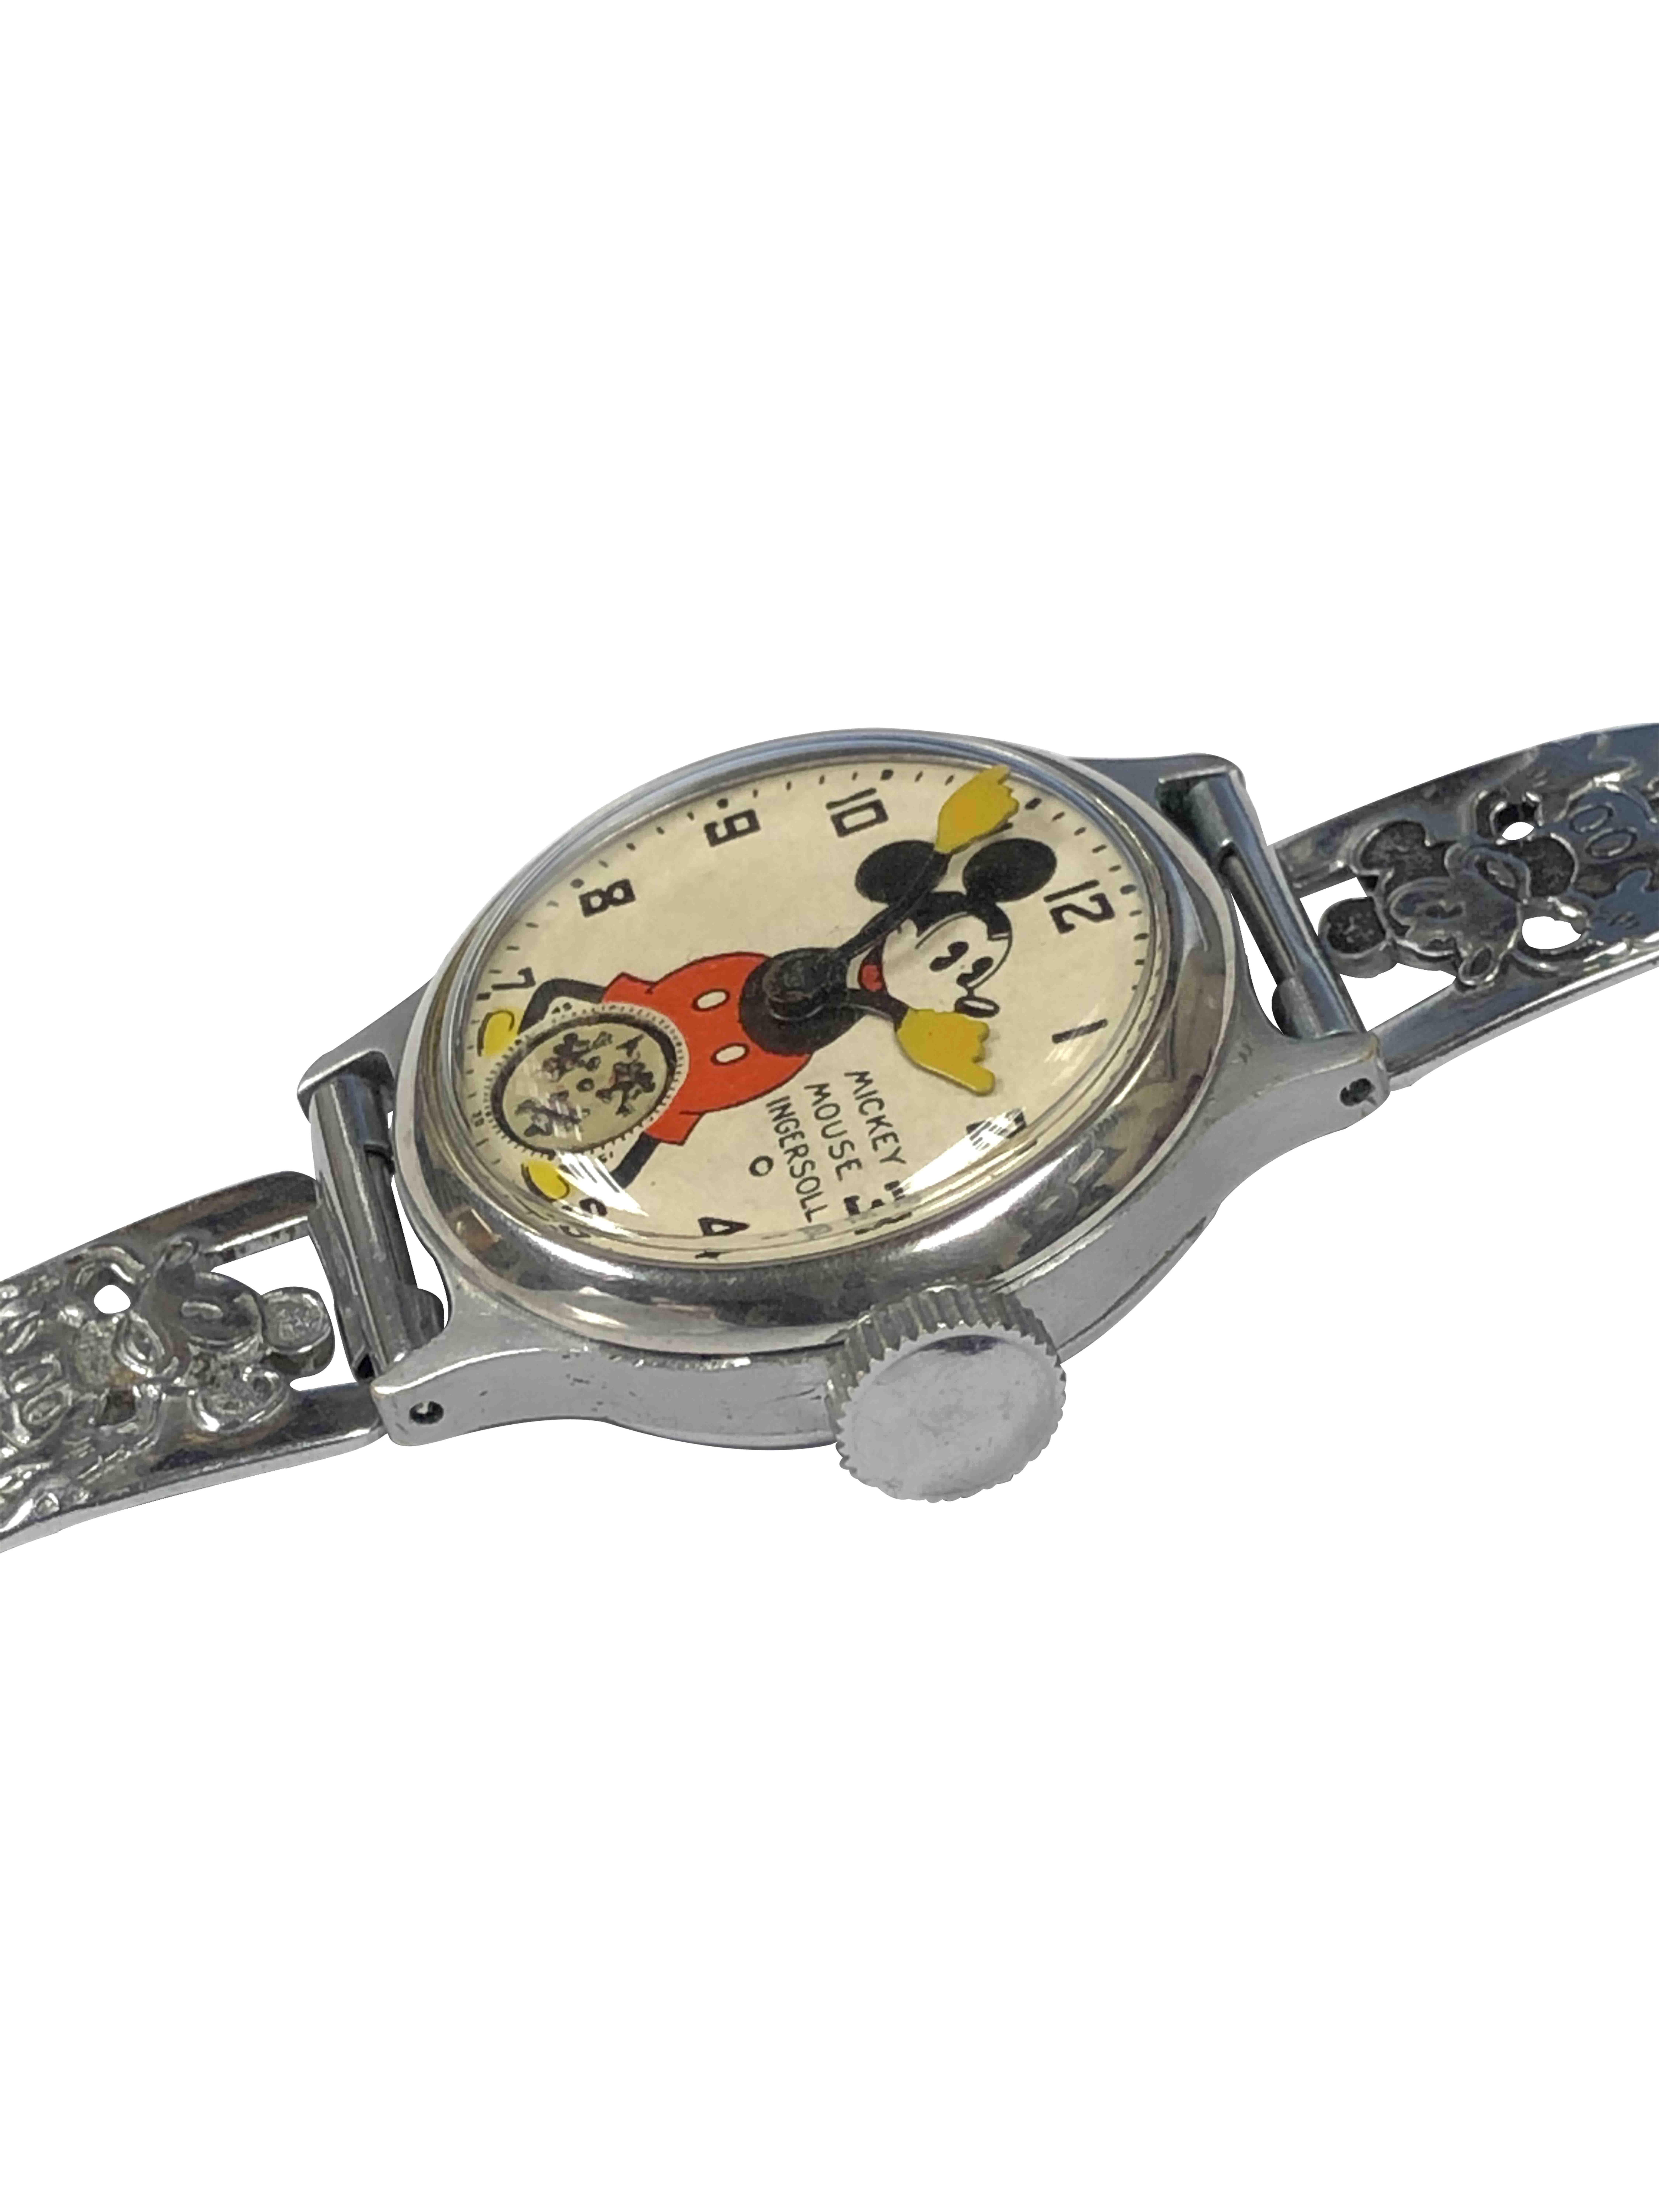 1930s mickey mouse watch